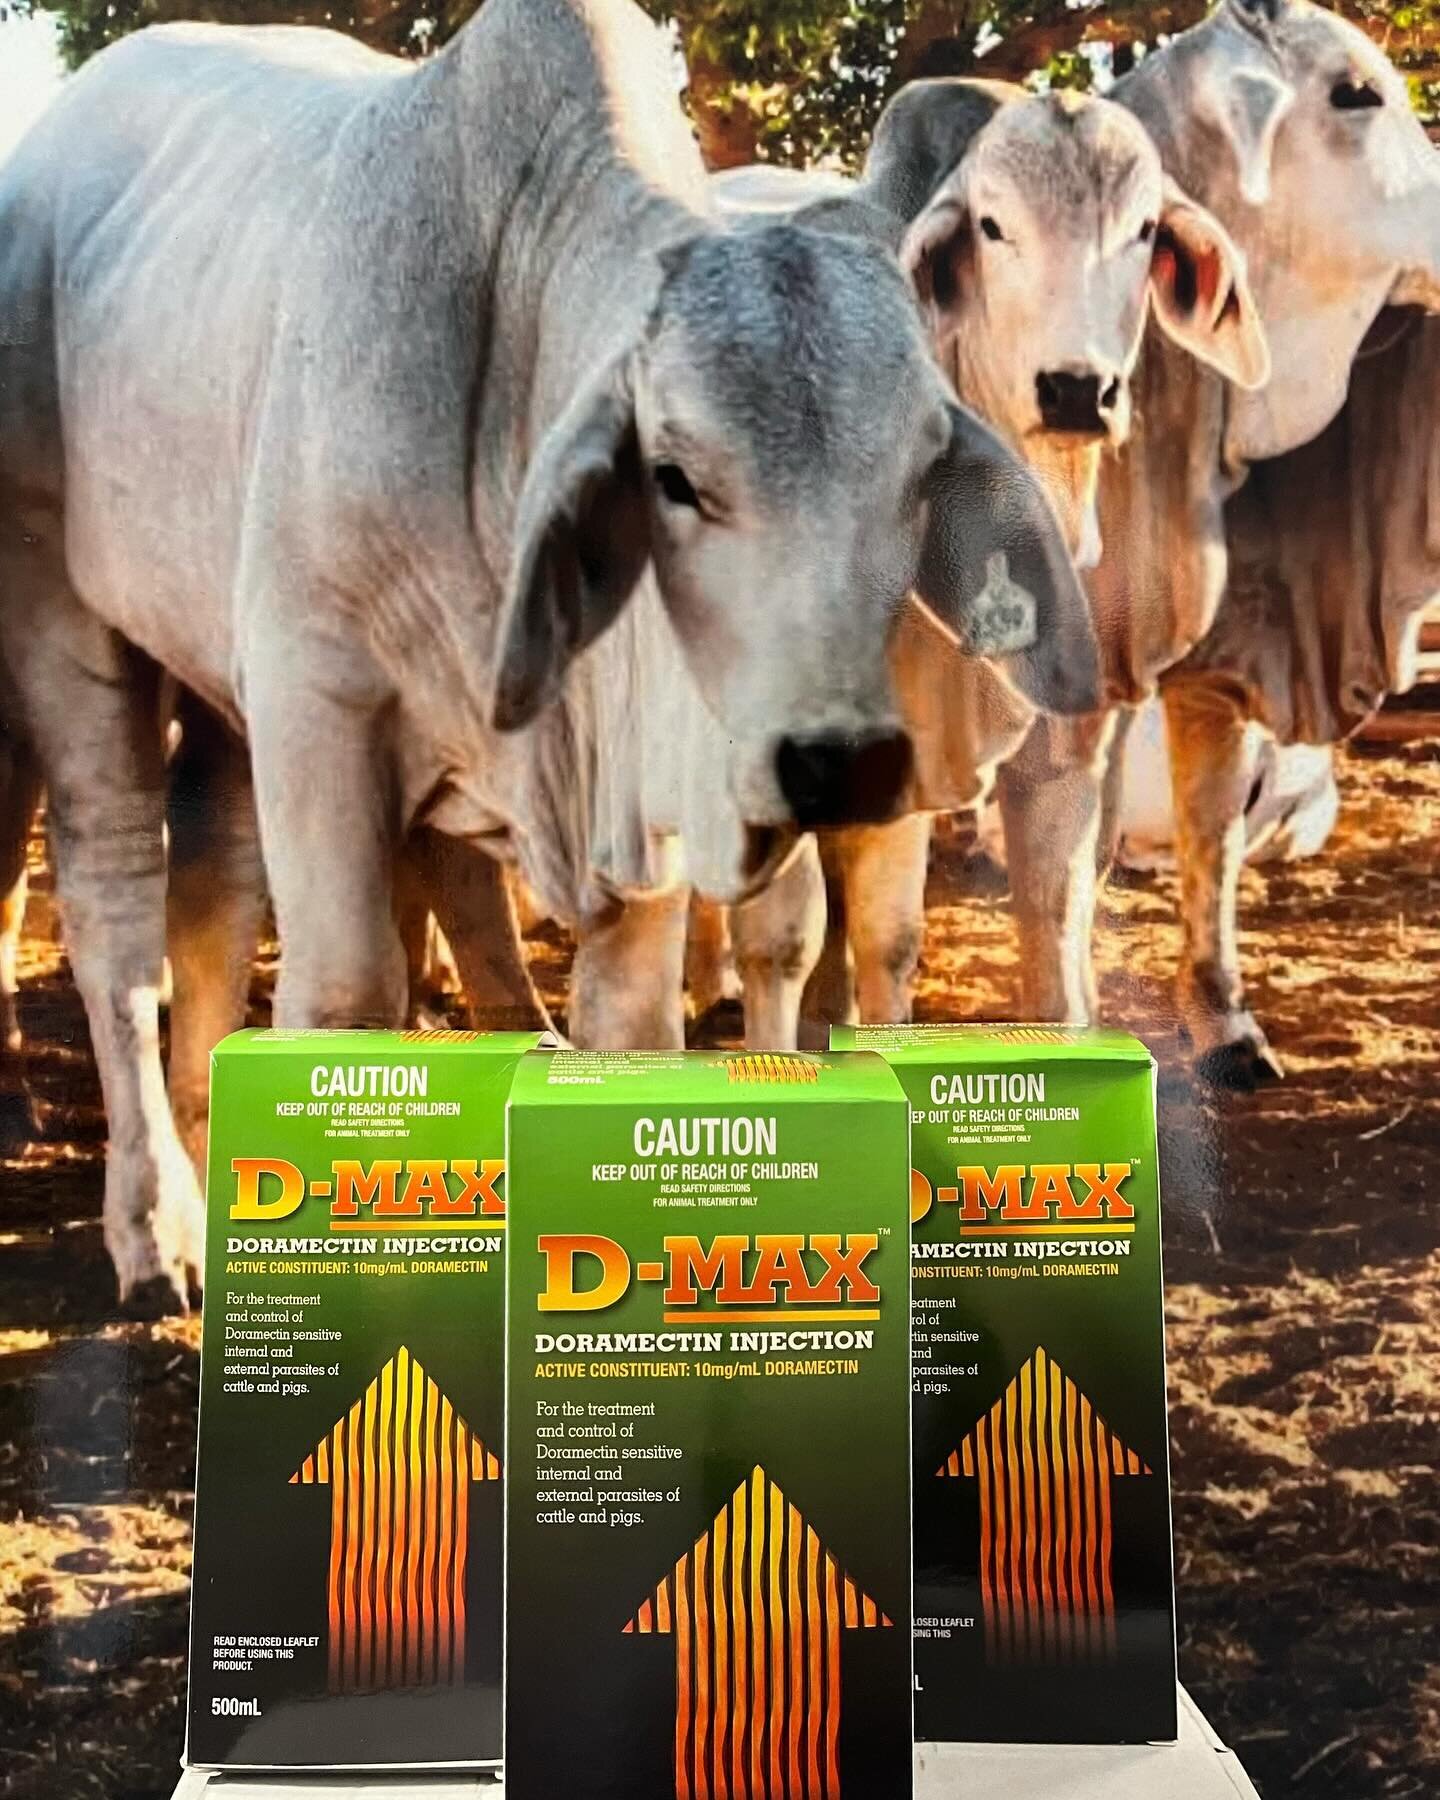 Animal health TLC continues!

Next up on the list ... cattle and pigs 🐮🐽 drop us a comment or direcet message &amp; we will reveal our special price on Abbey's D-MAX&trade; Doramectin Injection.